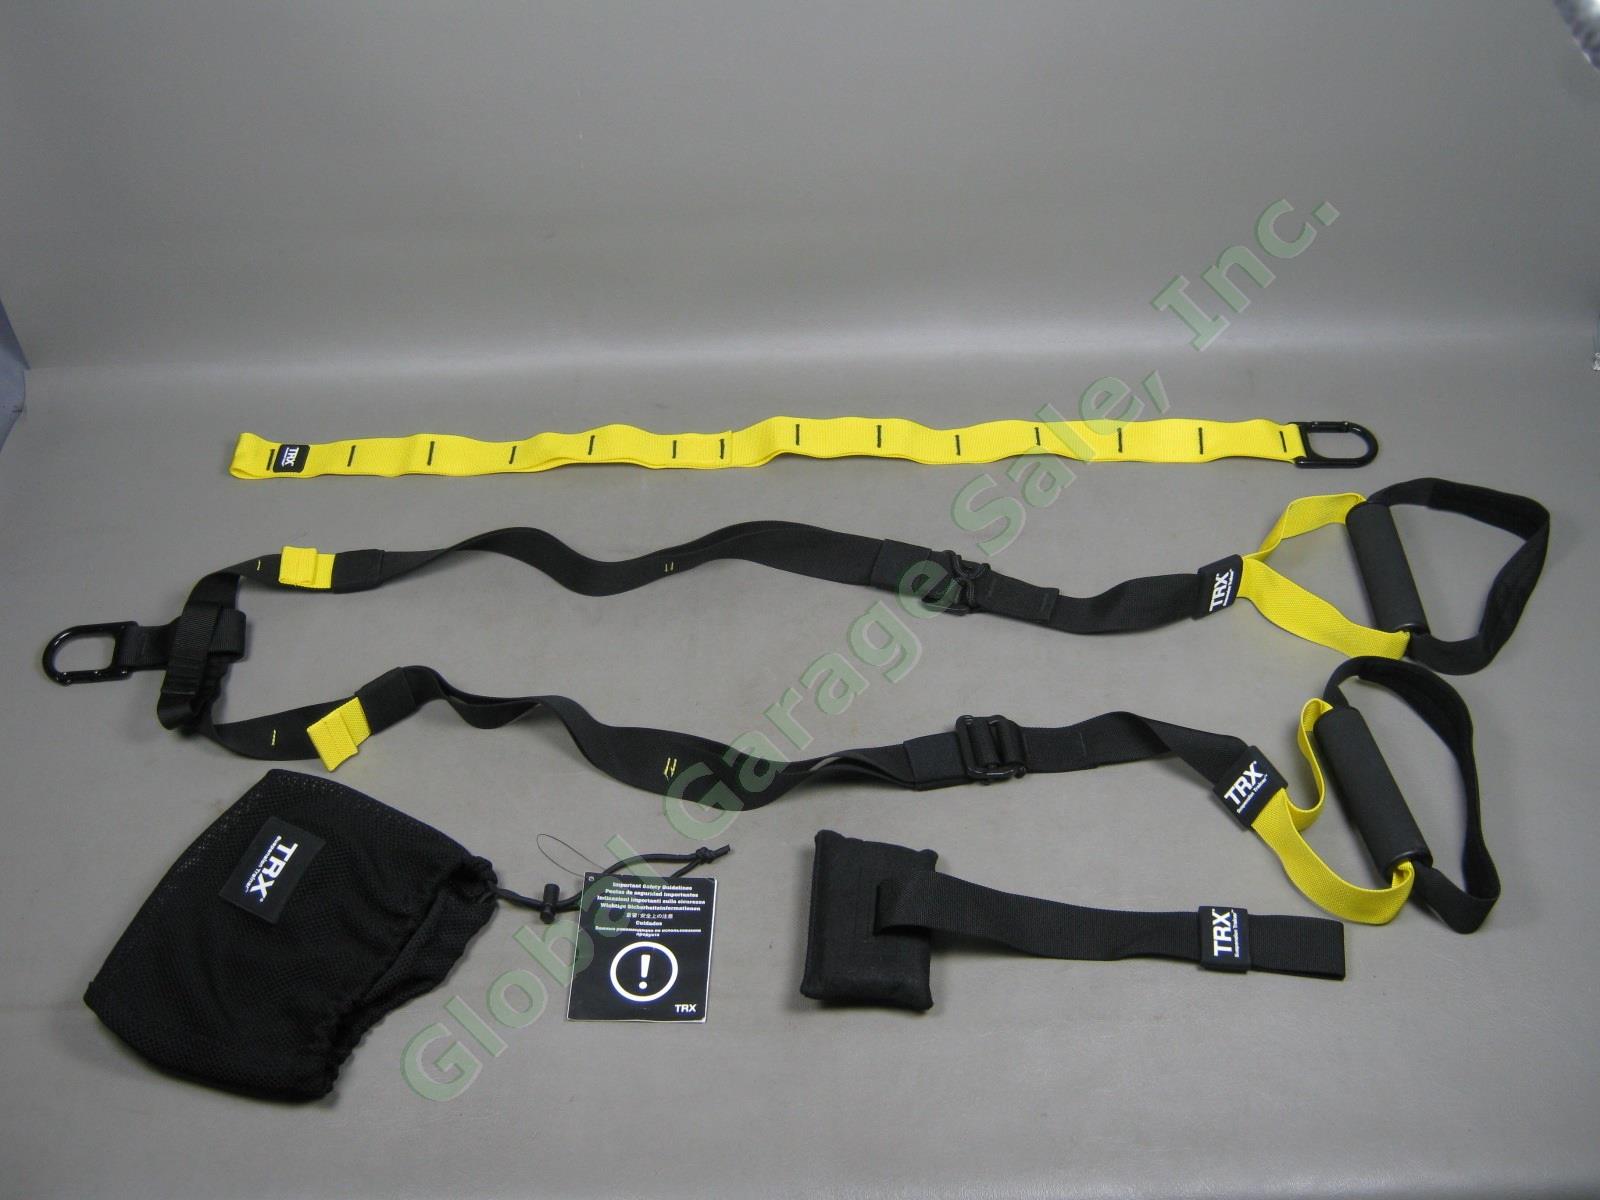 TRX Suspension Trainer Home Gym Fitness Training Strength Body Band Strap Kit NR